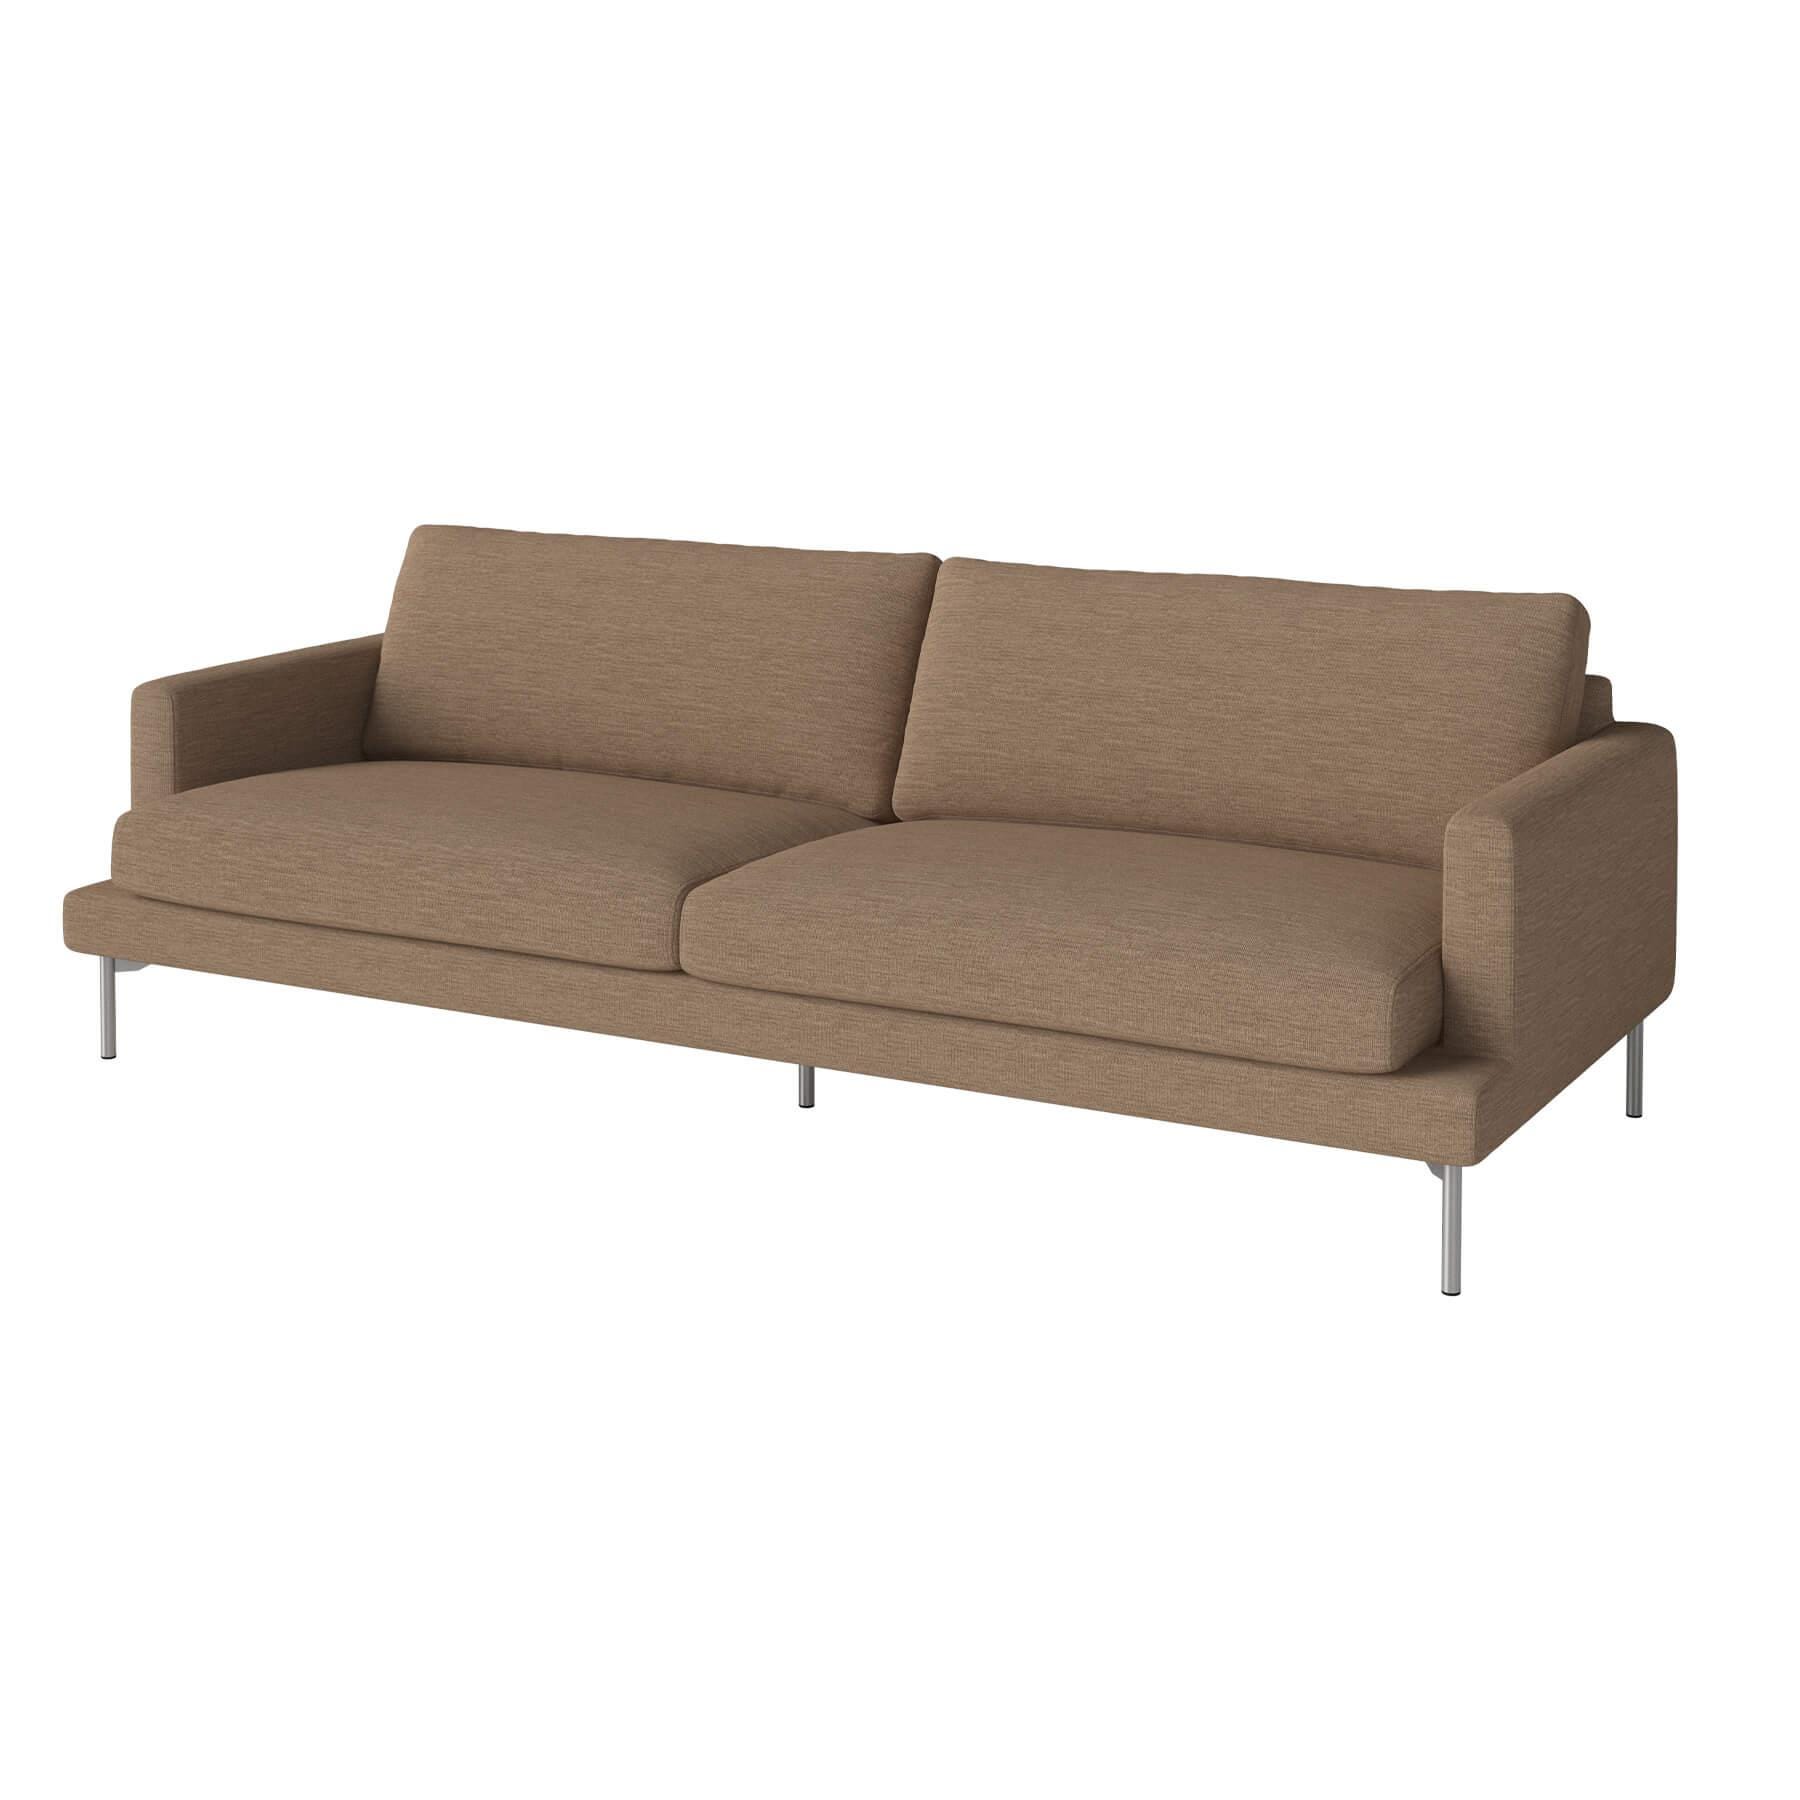 Bolia Veneda Sofa 3 Seater Sofa Brushed Steel Qual Curry Brown Designer Furniture From Holloways Of Ludlow